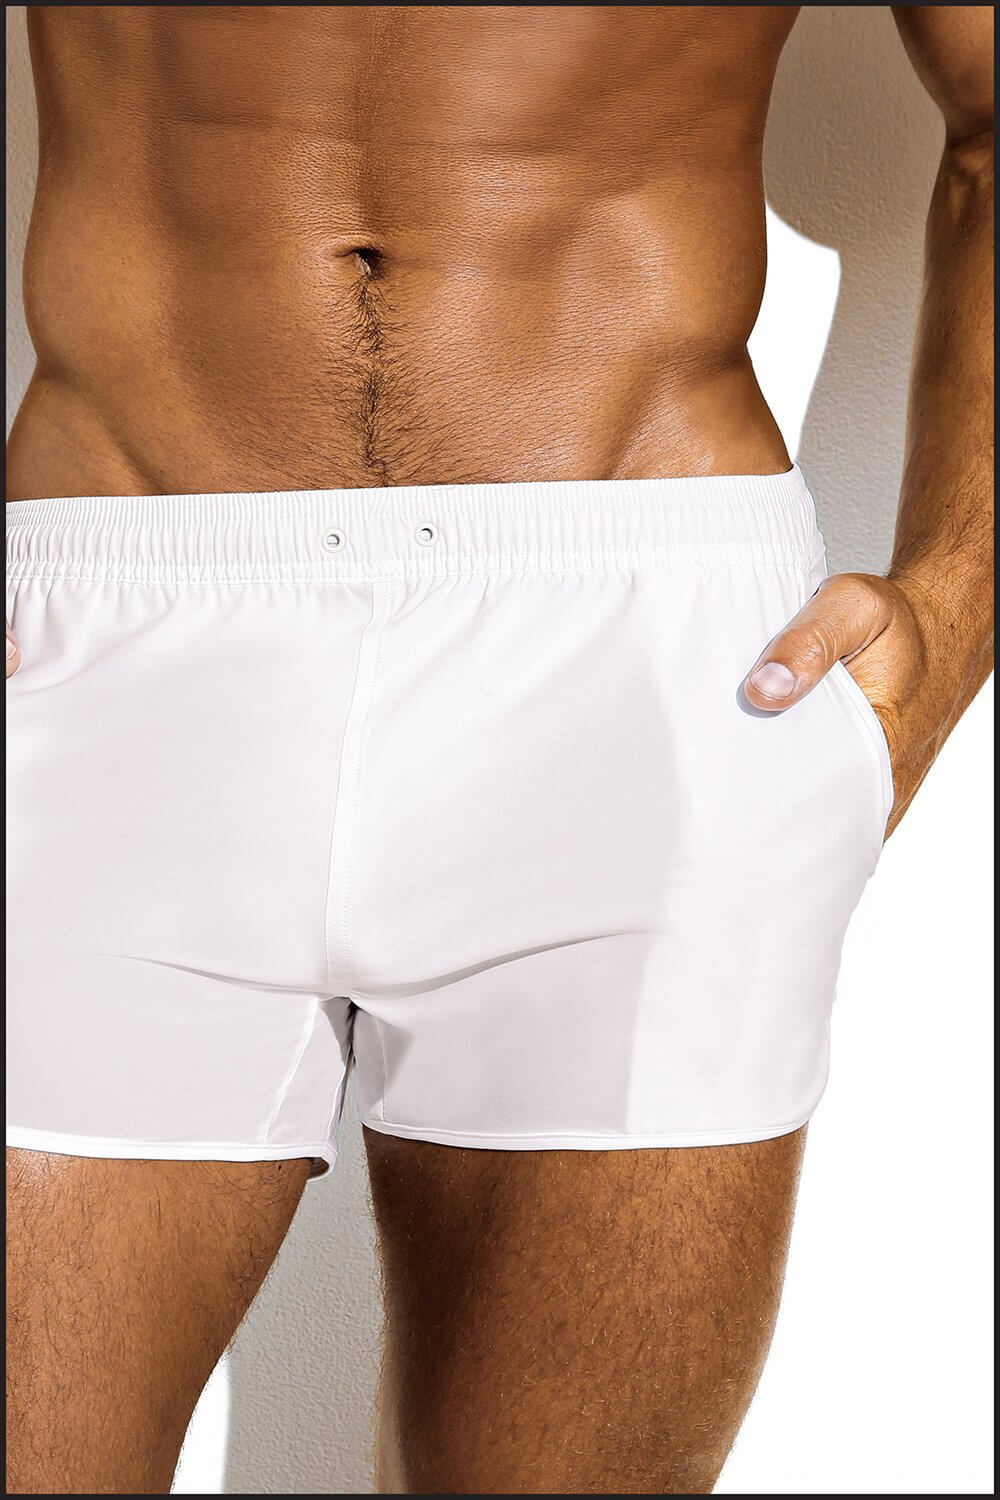 Charlie by Matthew Zink Fitness Circuit Trainer Short